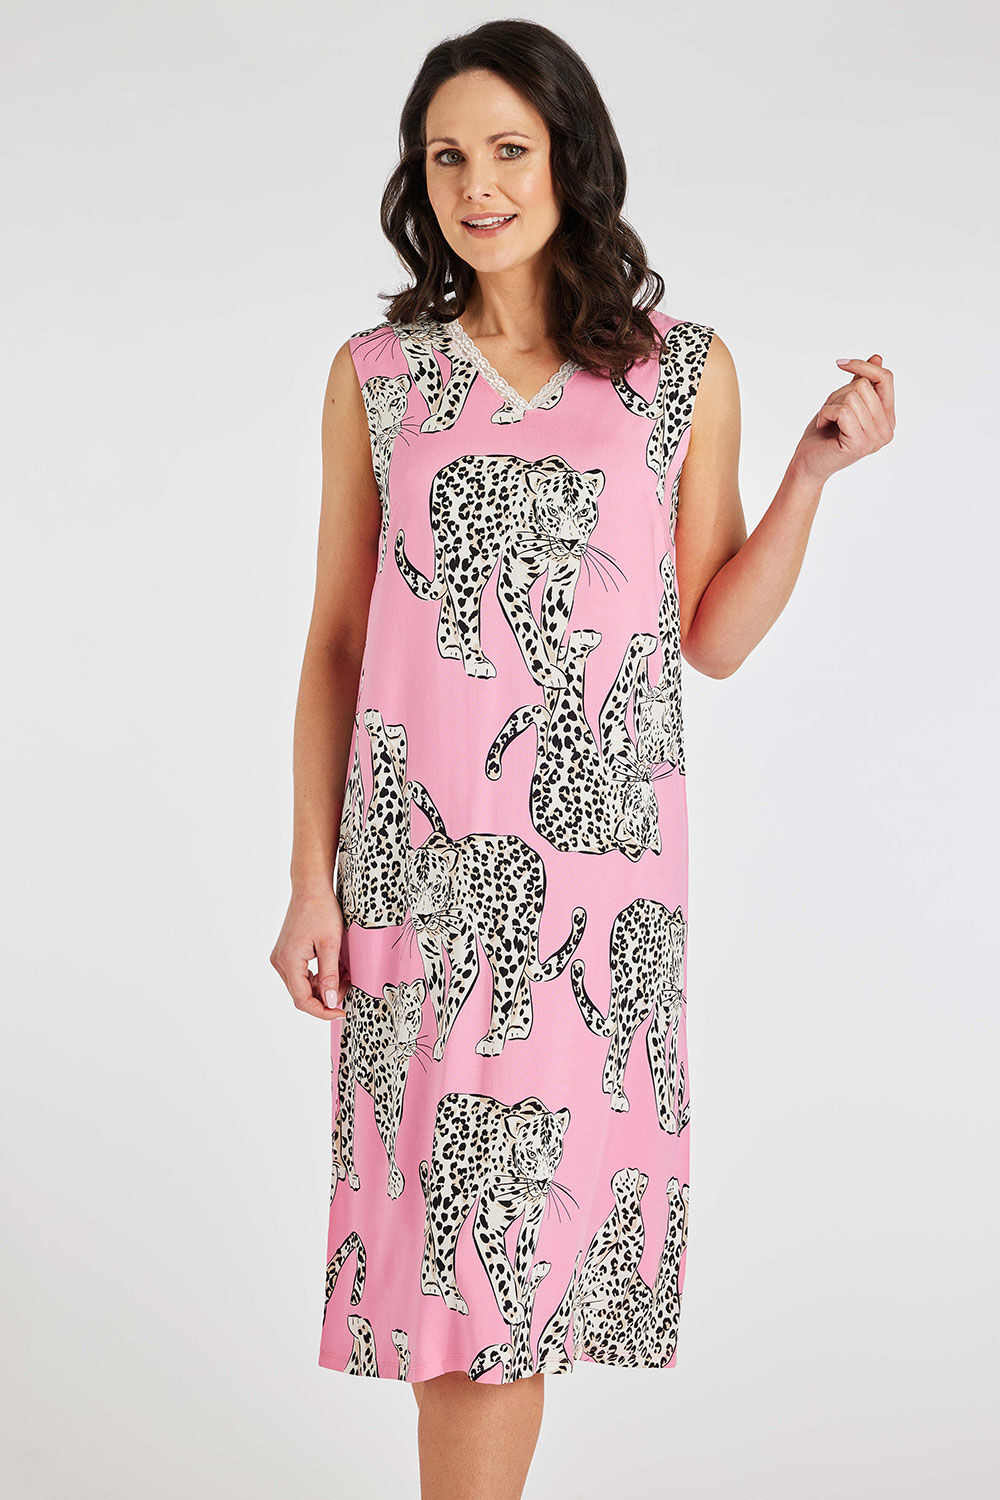 Bonmarche Pale Pink All Over Leopard Design Nightdress With Lace Detail, Size: 08-10